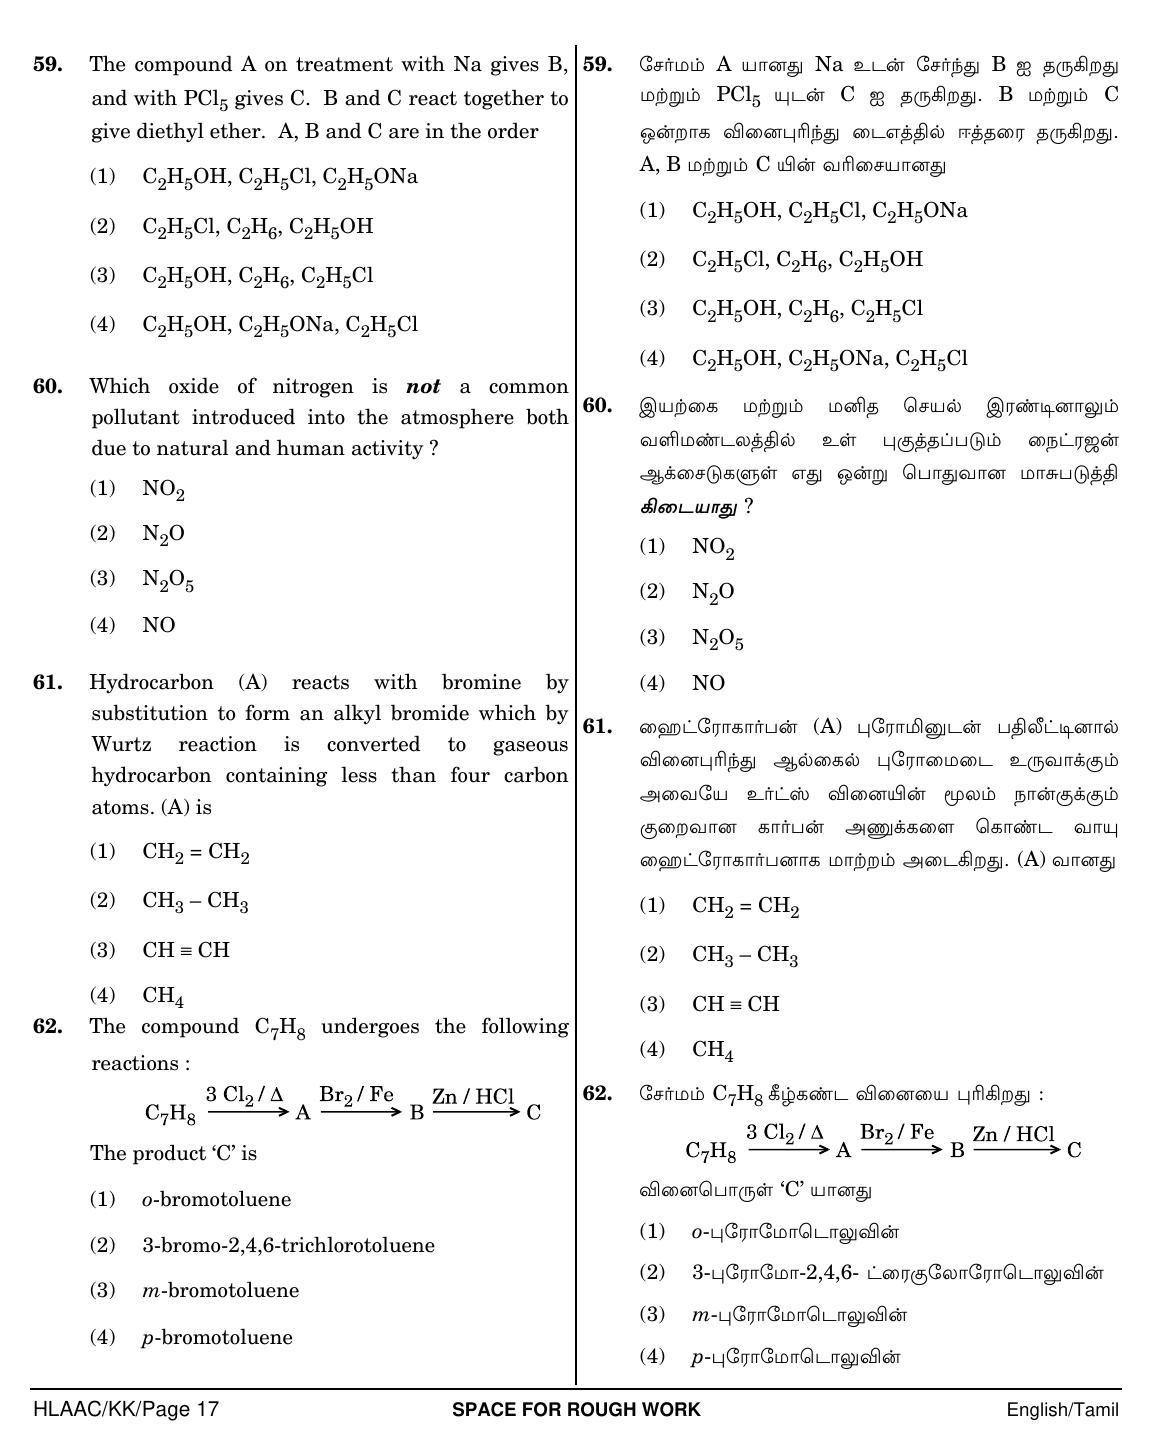 NEET Tamil KK 2018 Question Paper - Page 17